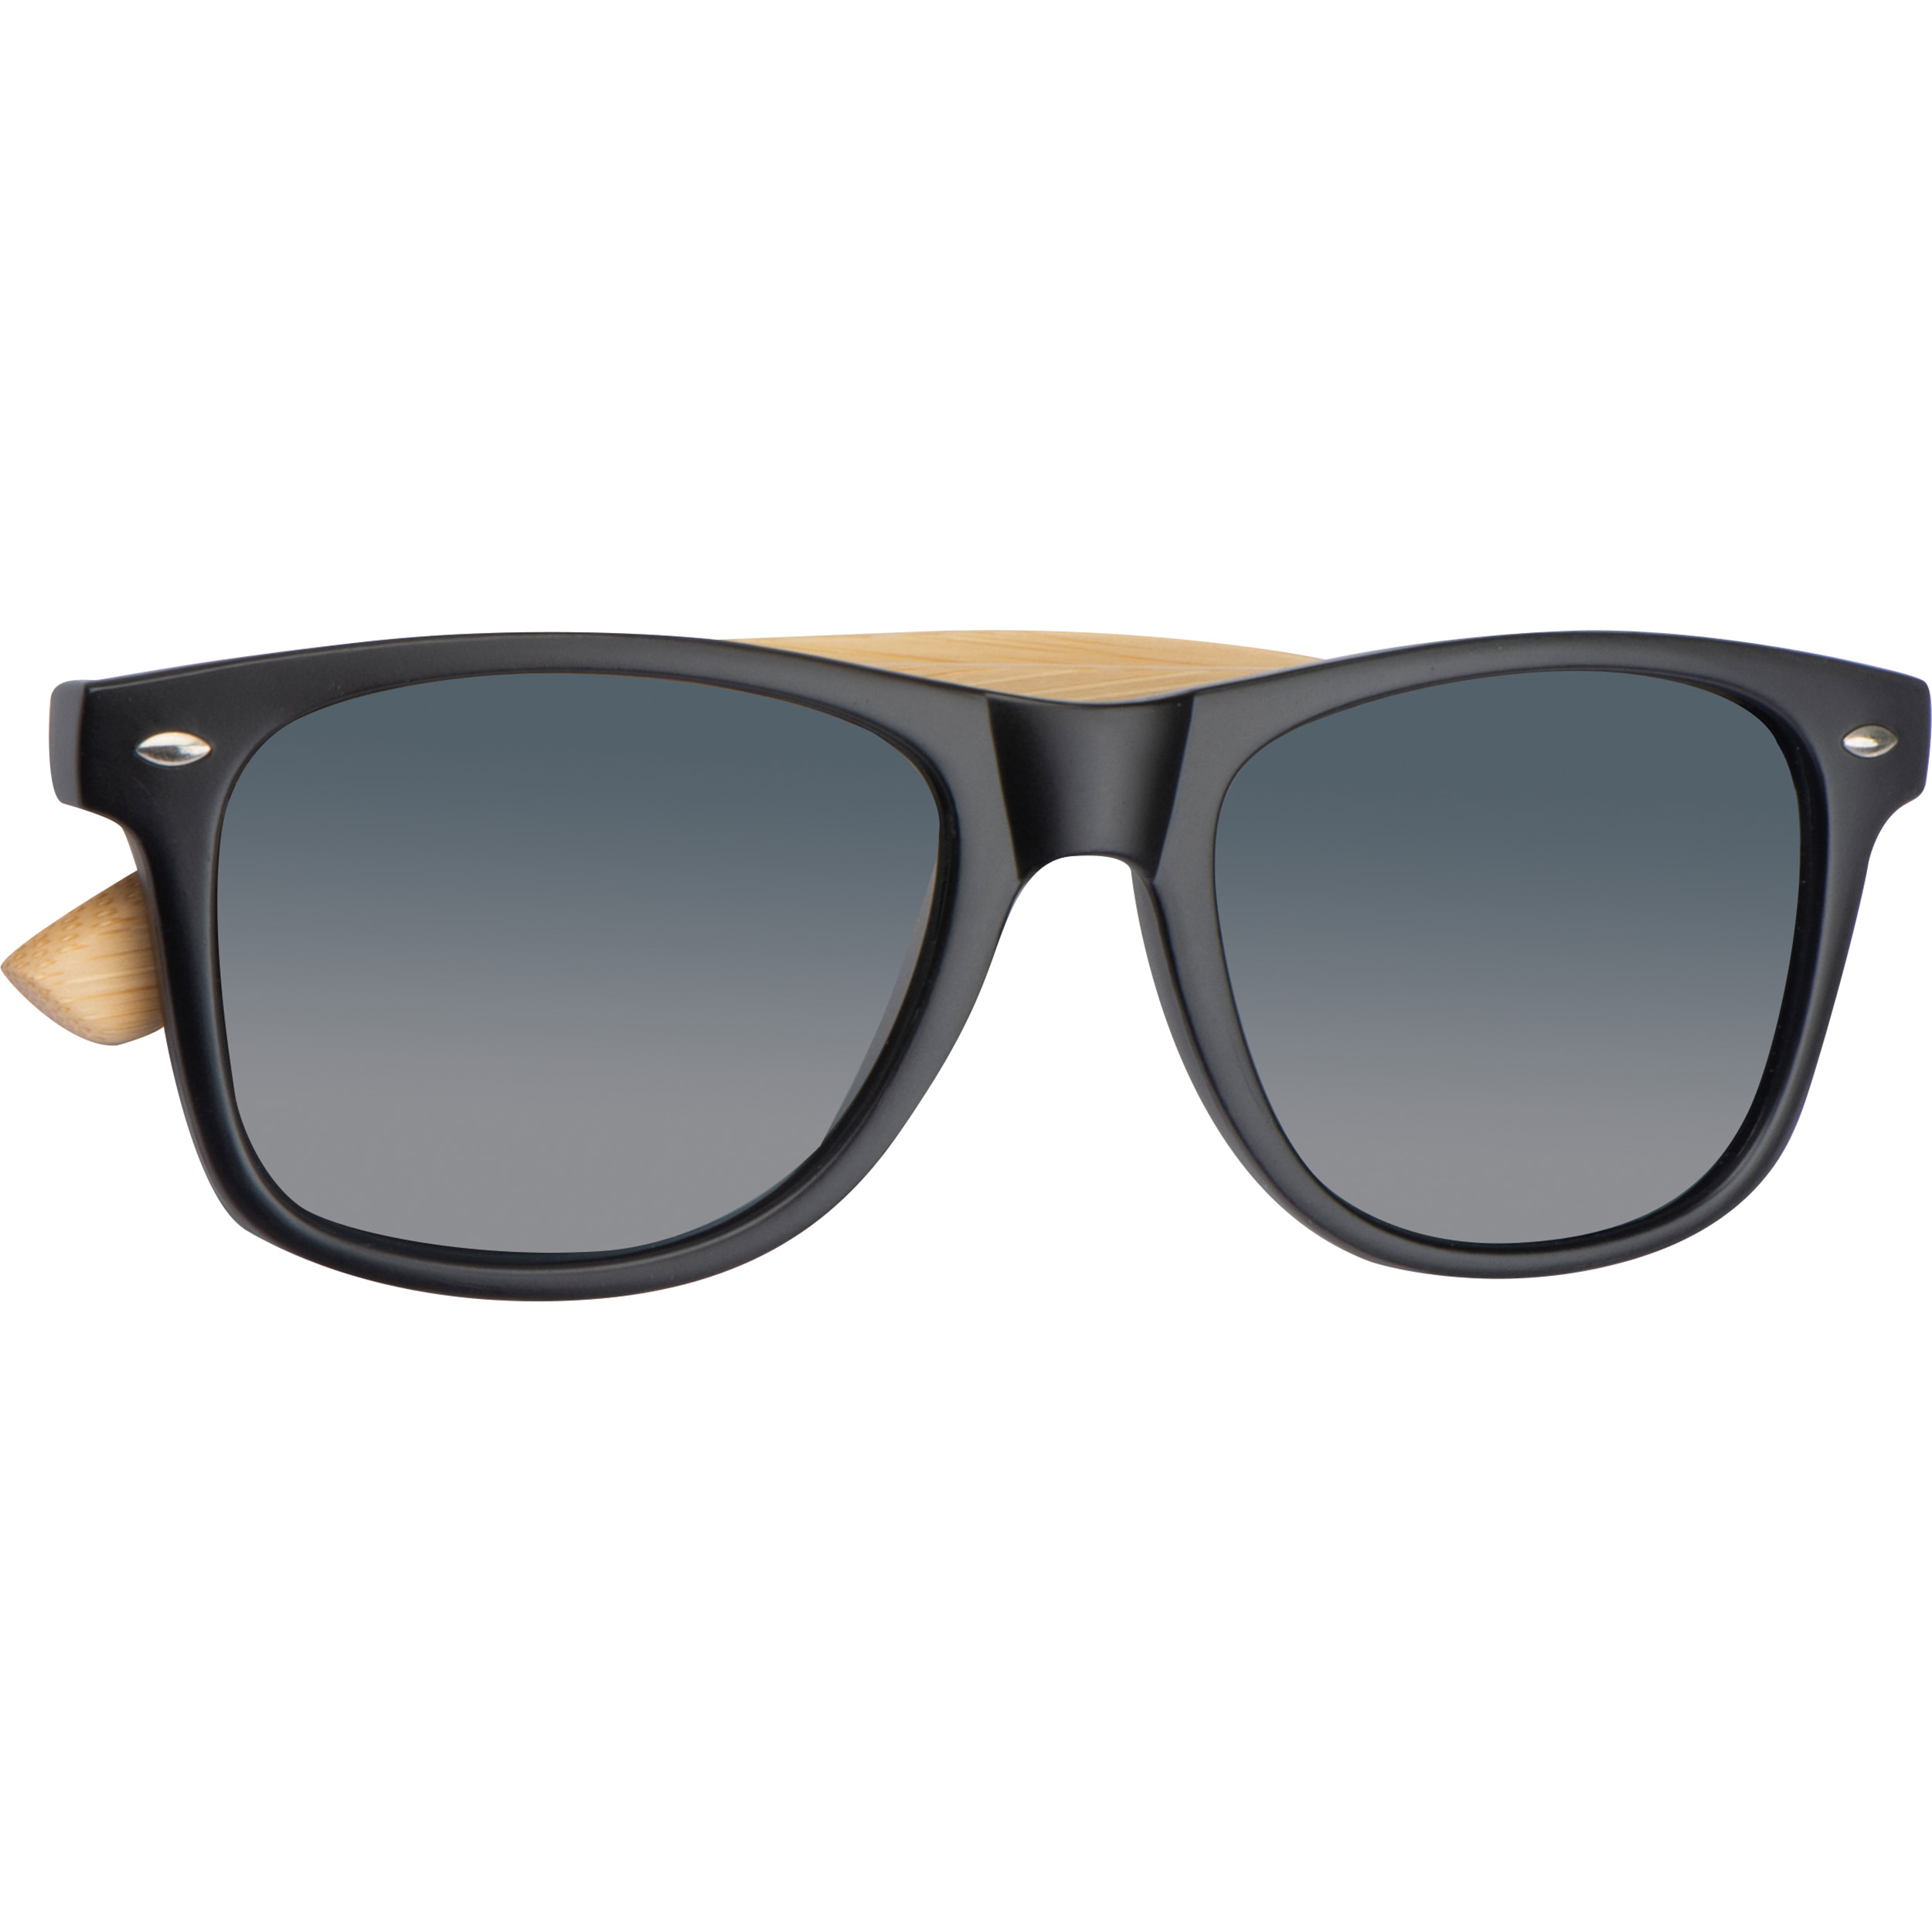 Sunglasses with bamboo temples